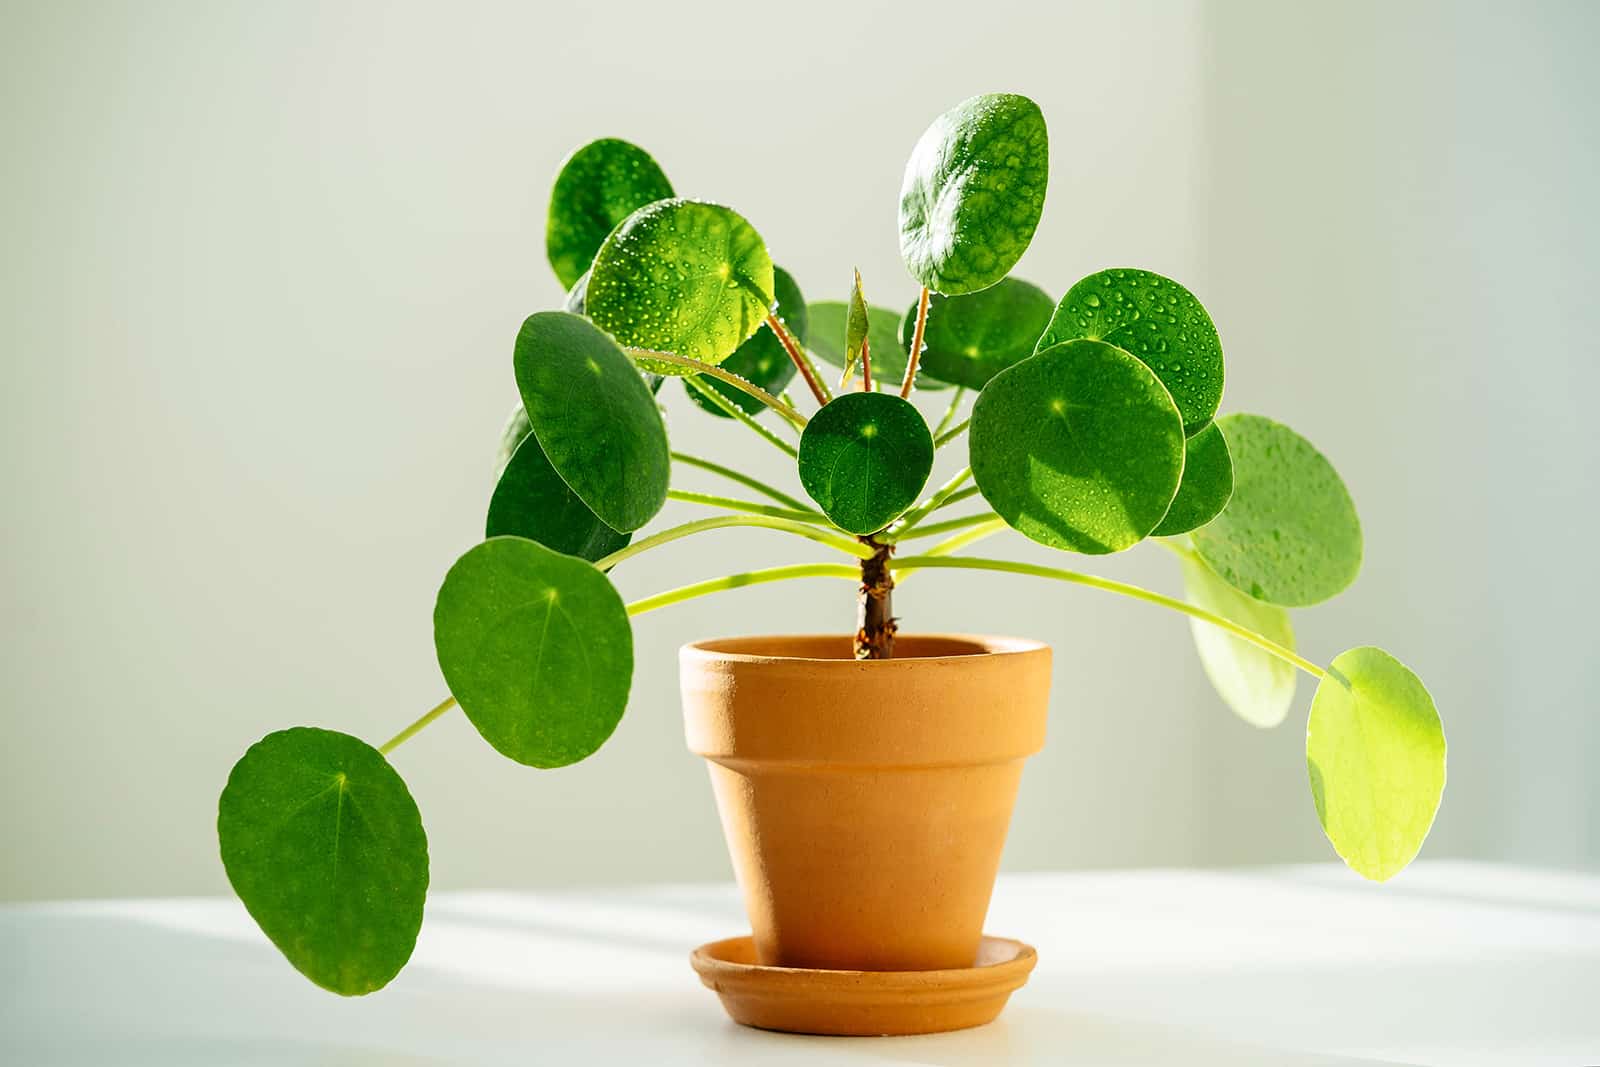 Pilea peperomioides houseplant in terracotta pot on a white table against a white wall